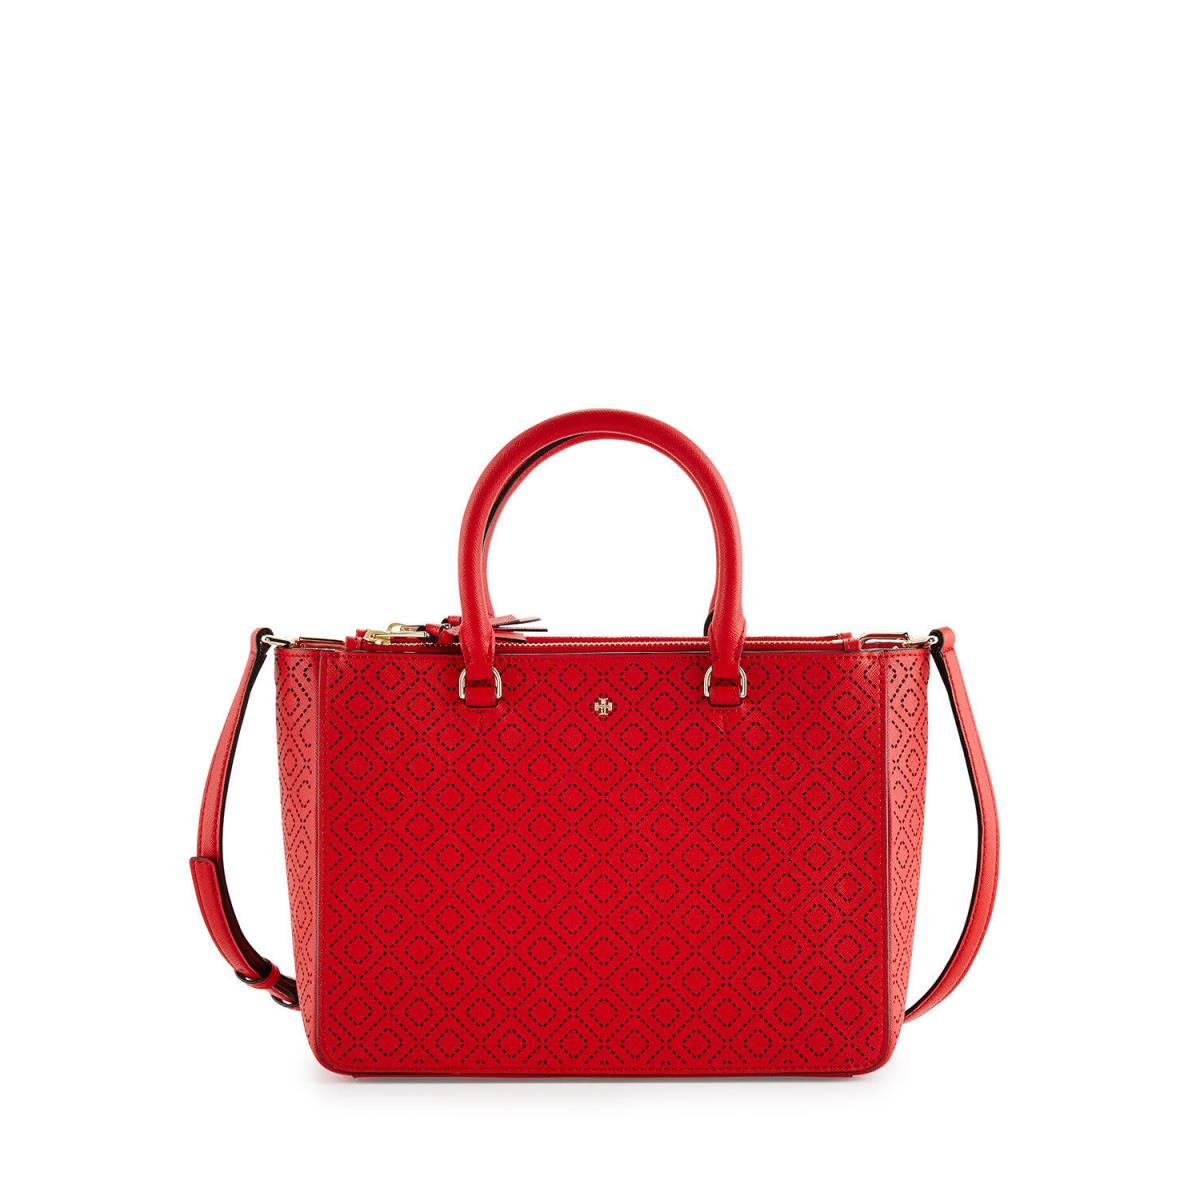 IN Plastic Tory Burch Robinson Perforated Red Small Multi Tote 550